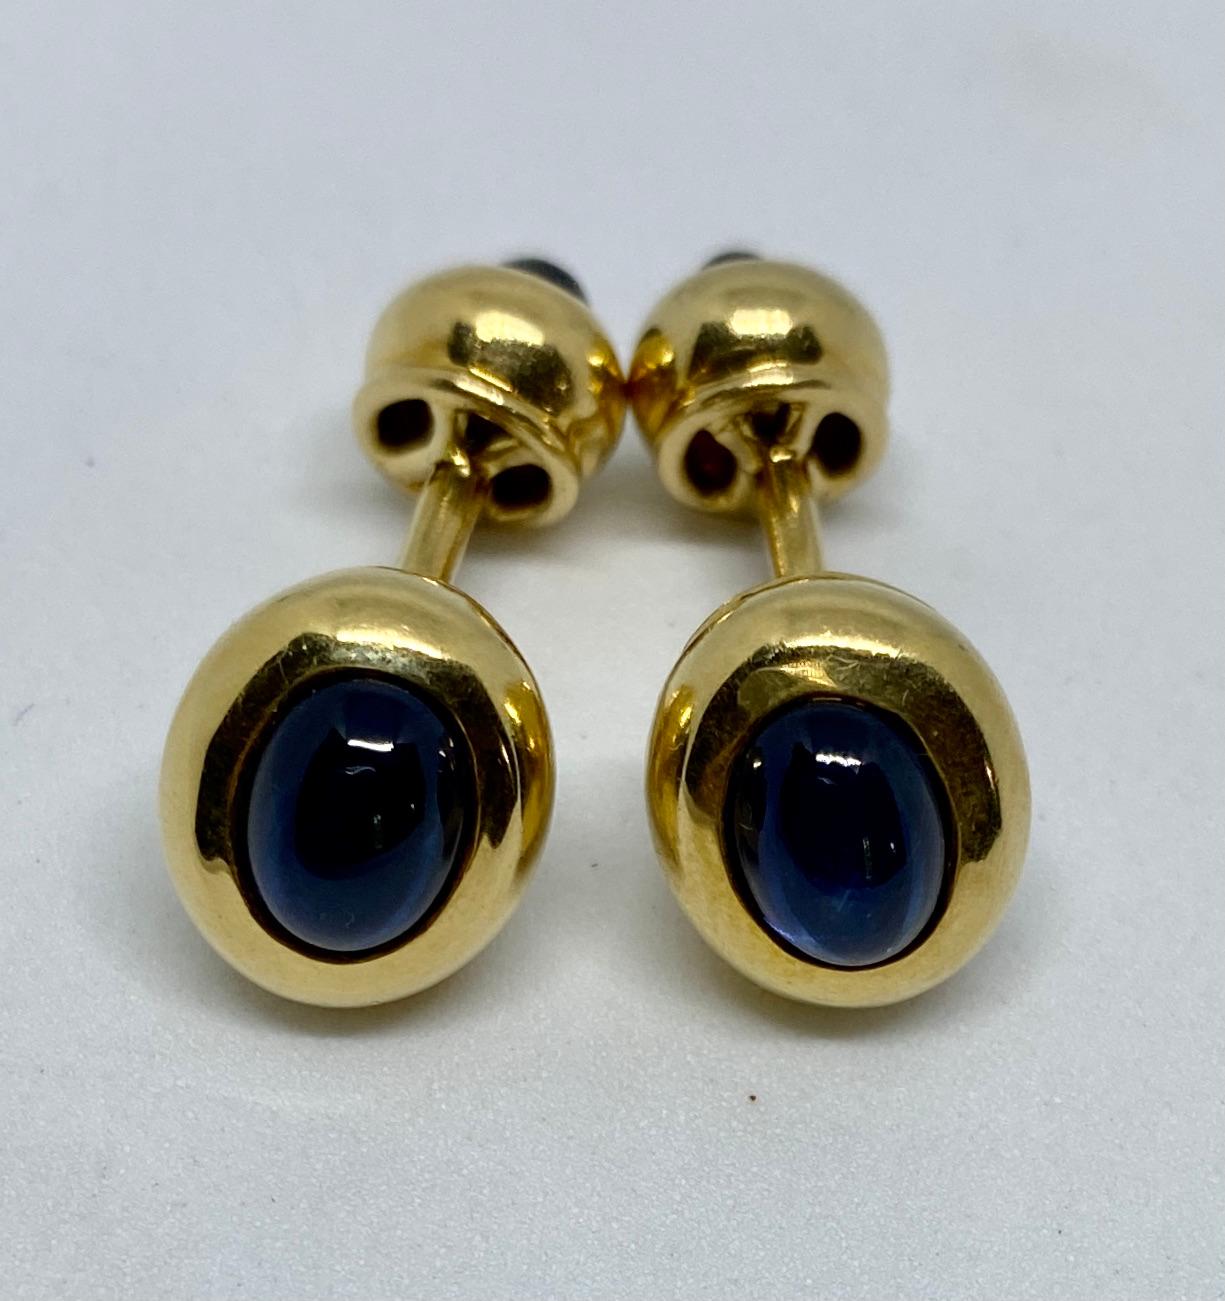 Handsome, beautifully made, double-sided cufflinks in 18K yellow gold featuring four deep blue sapphires.

The oval cufflink faces measure 12.3 by 10.6mm; the backs measure 9.1 by 8.2mm. Together the cufflinks weigh 13.87 grams.

The cufflinks are